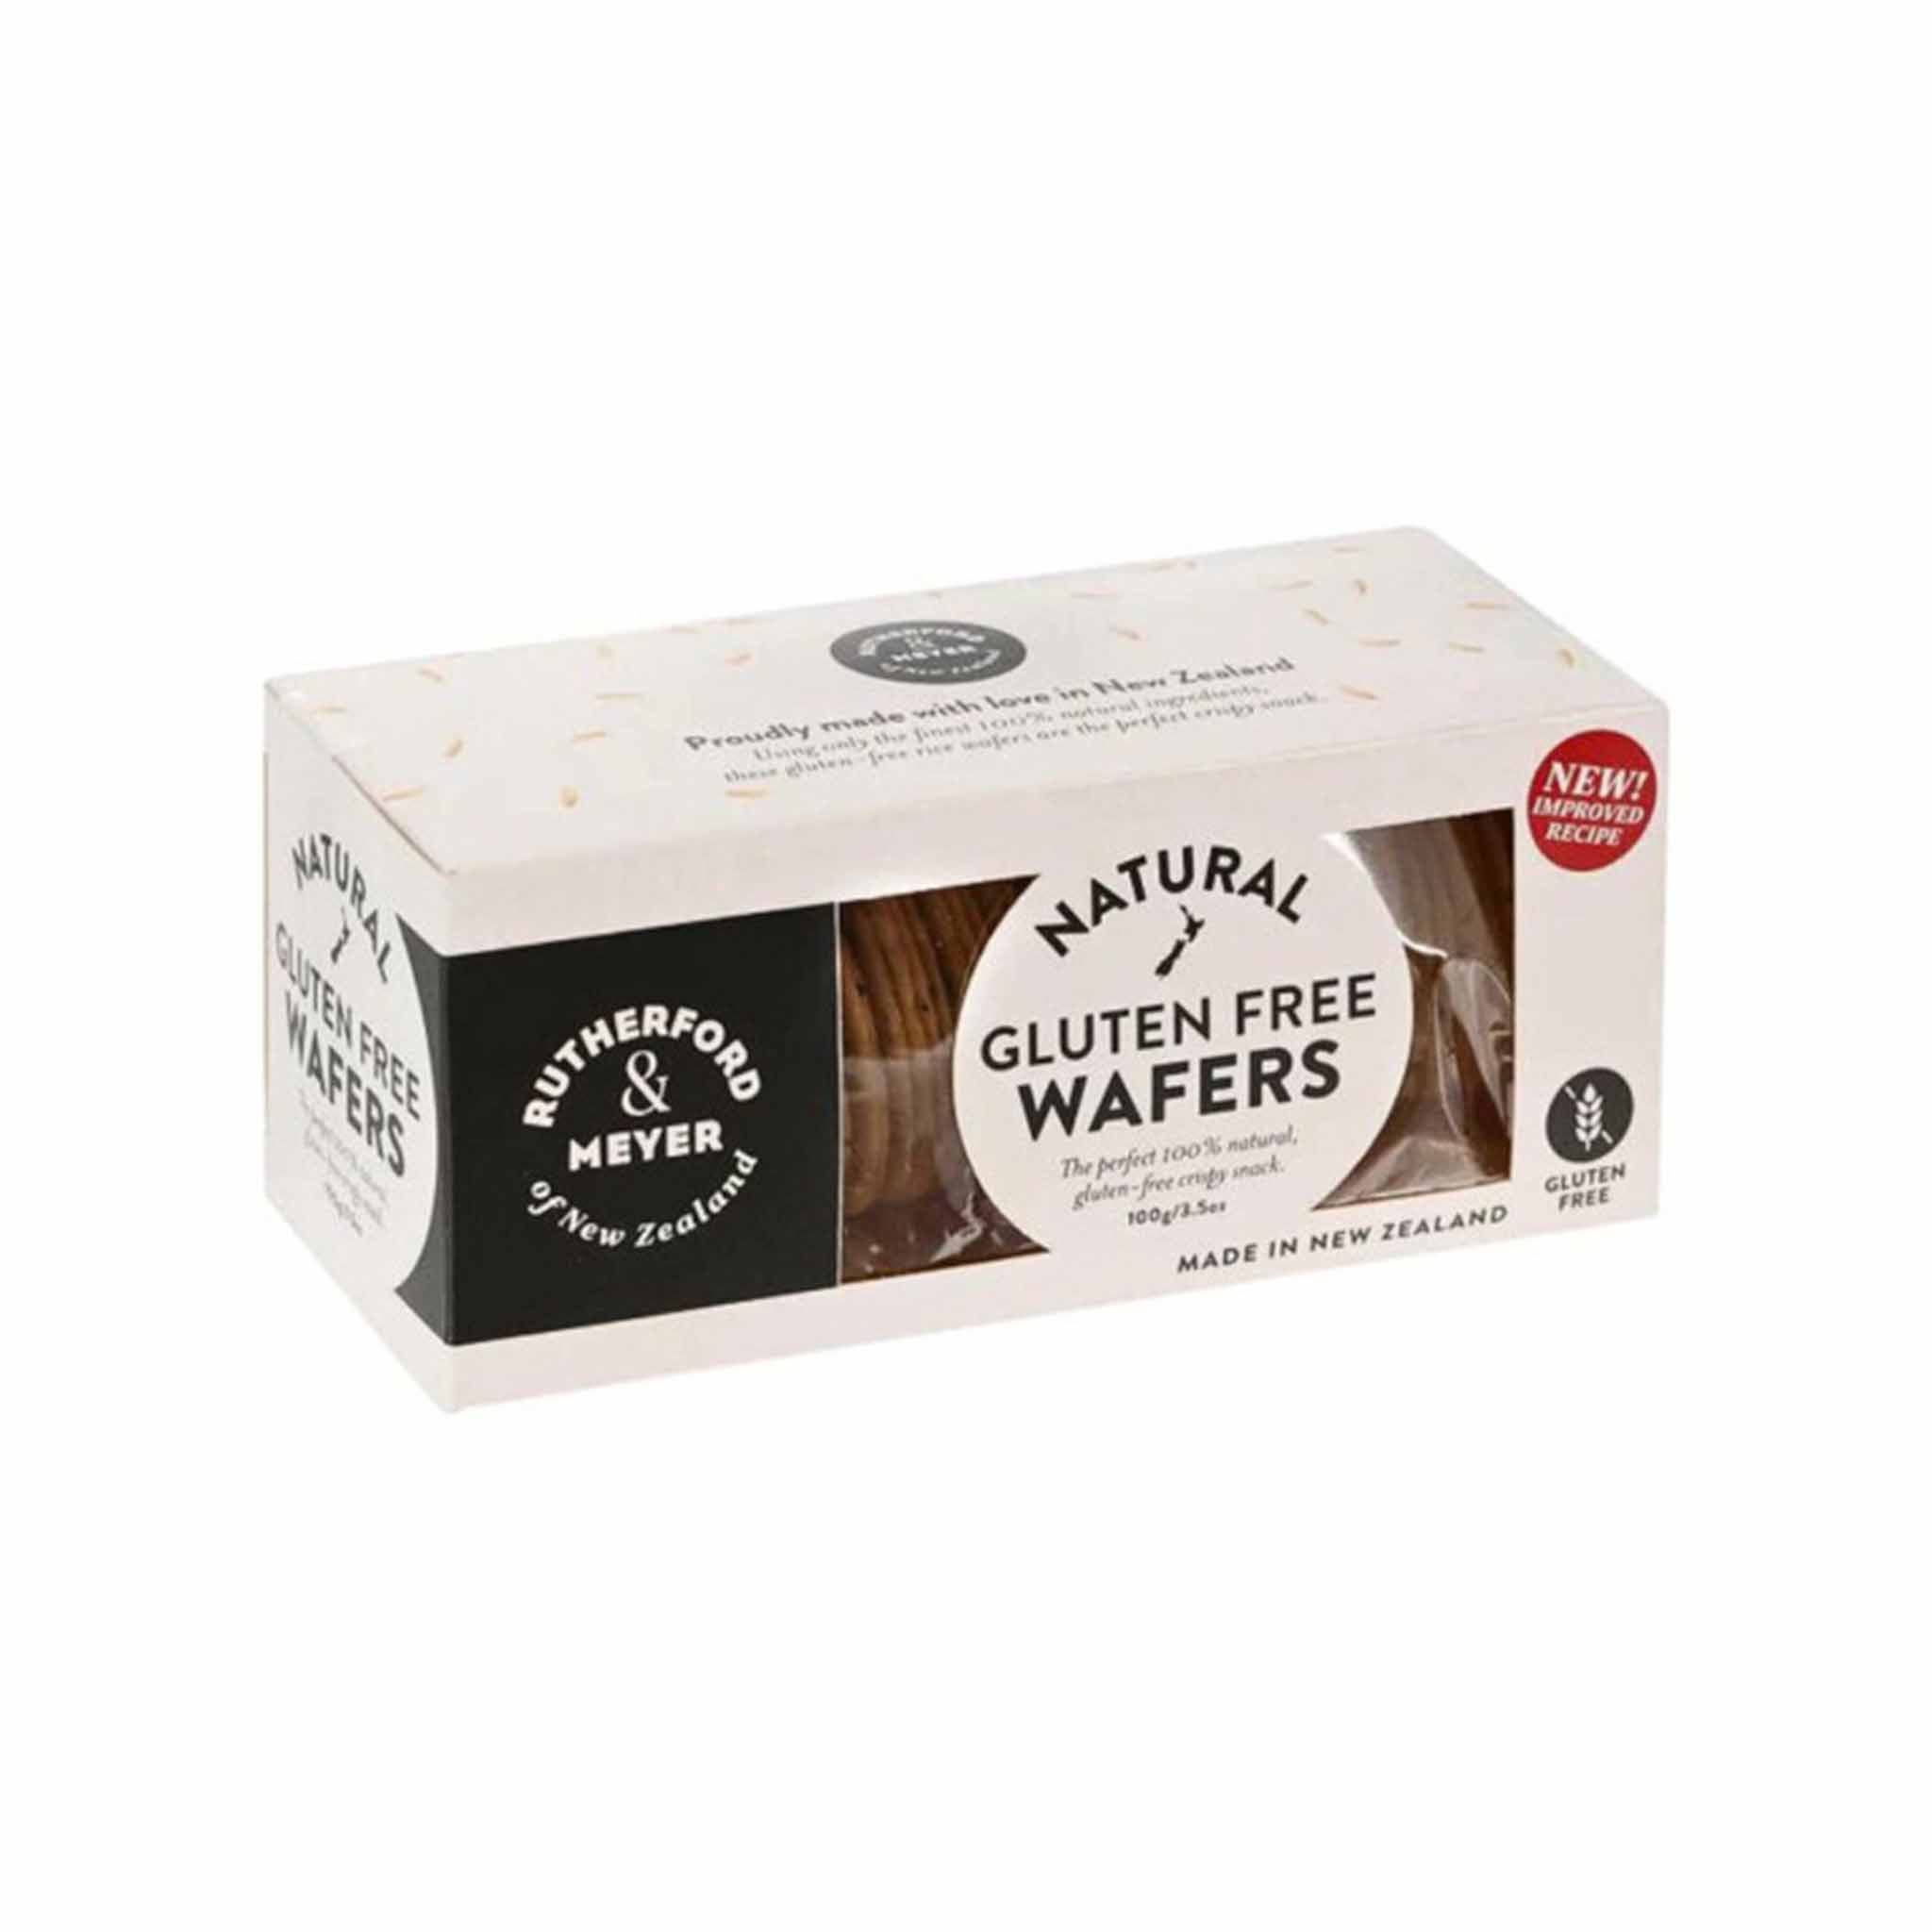 RUTHERFORD & MEYER GLUTEN FREE WAFERS 100g